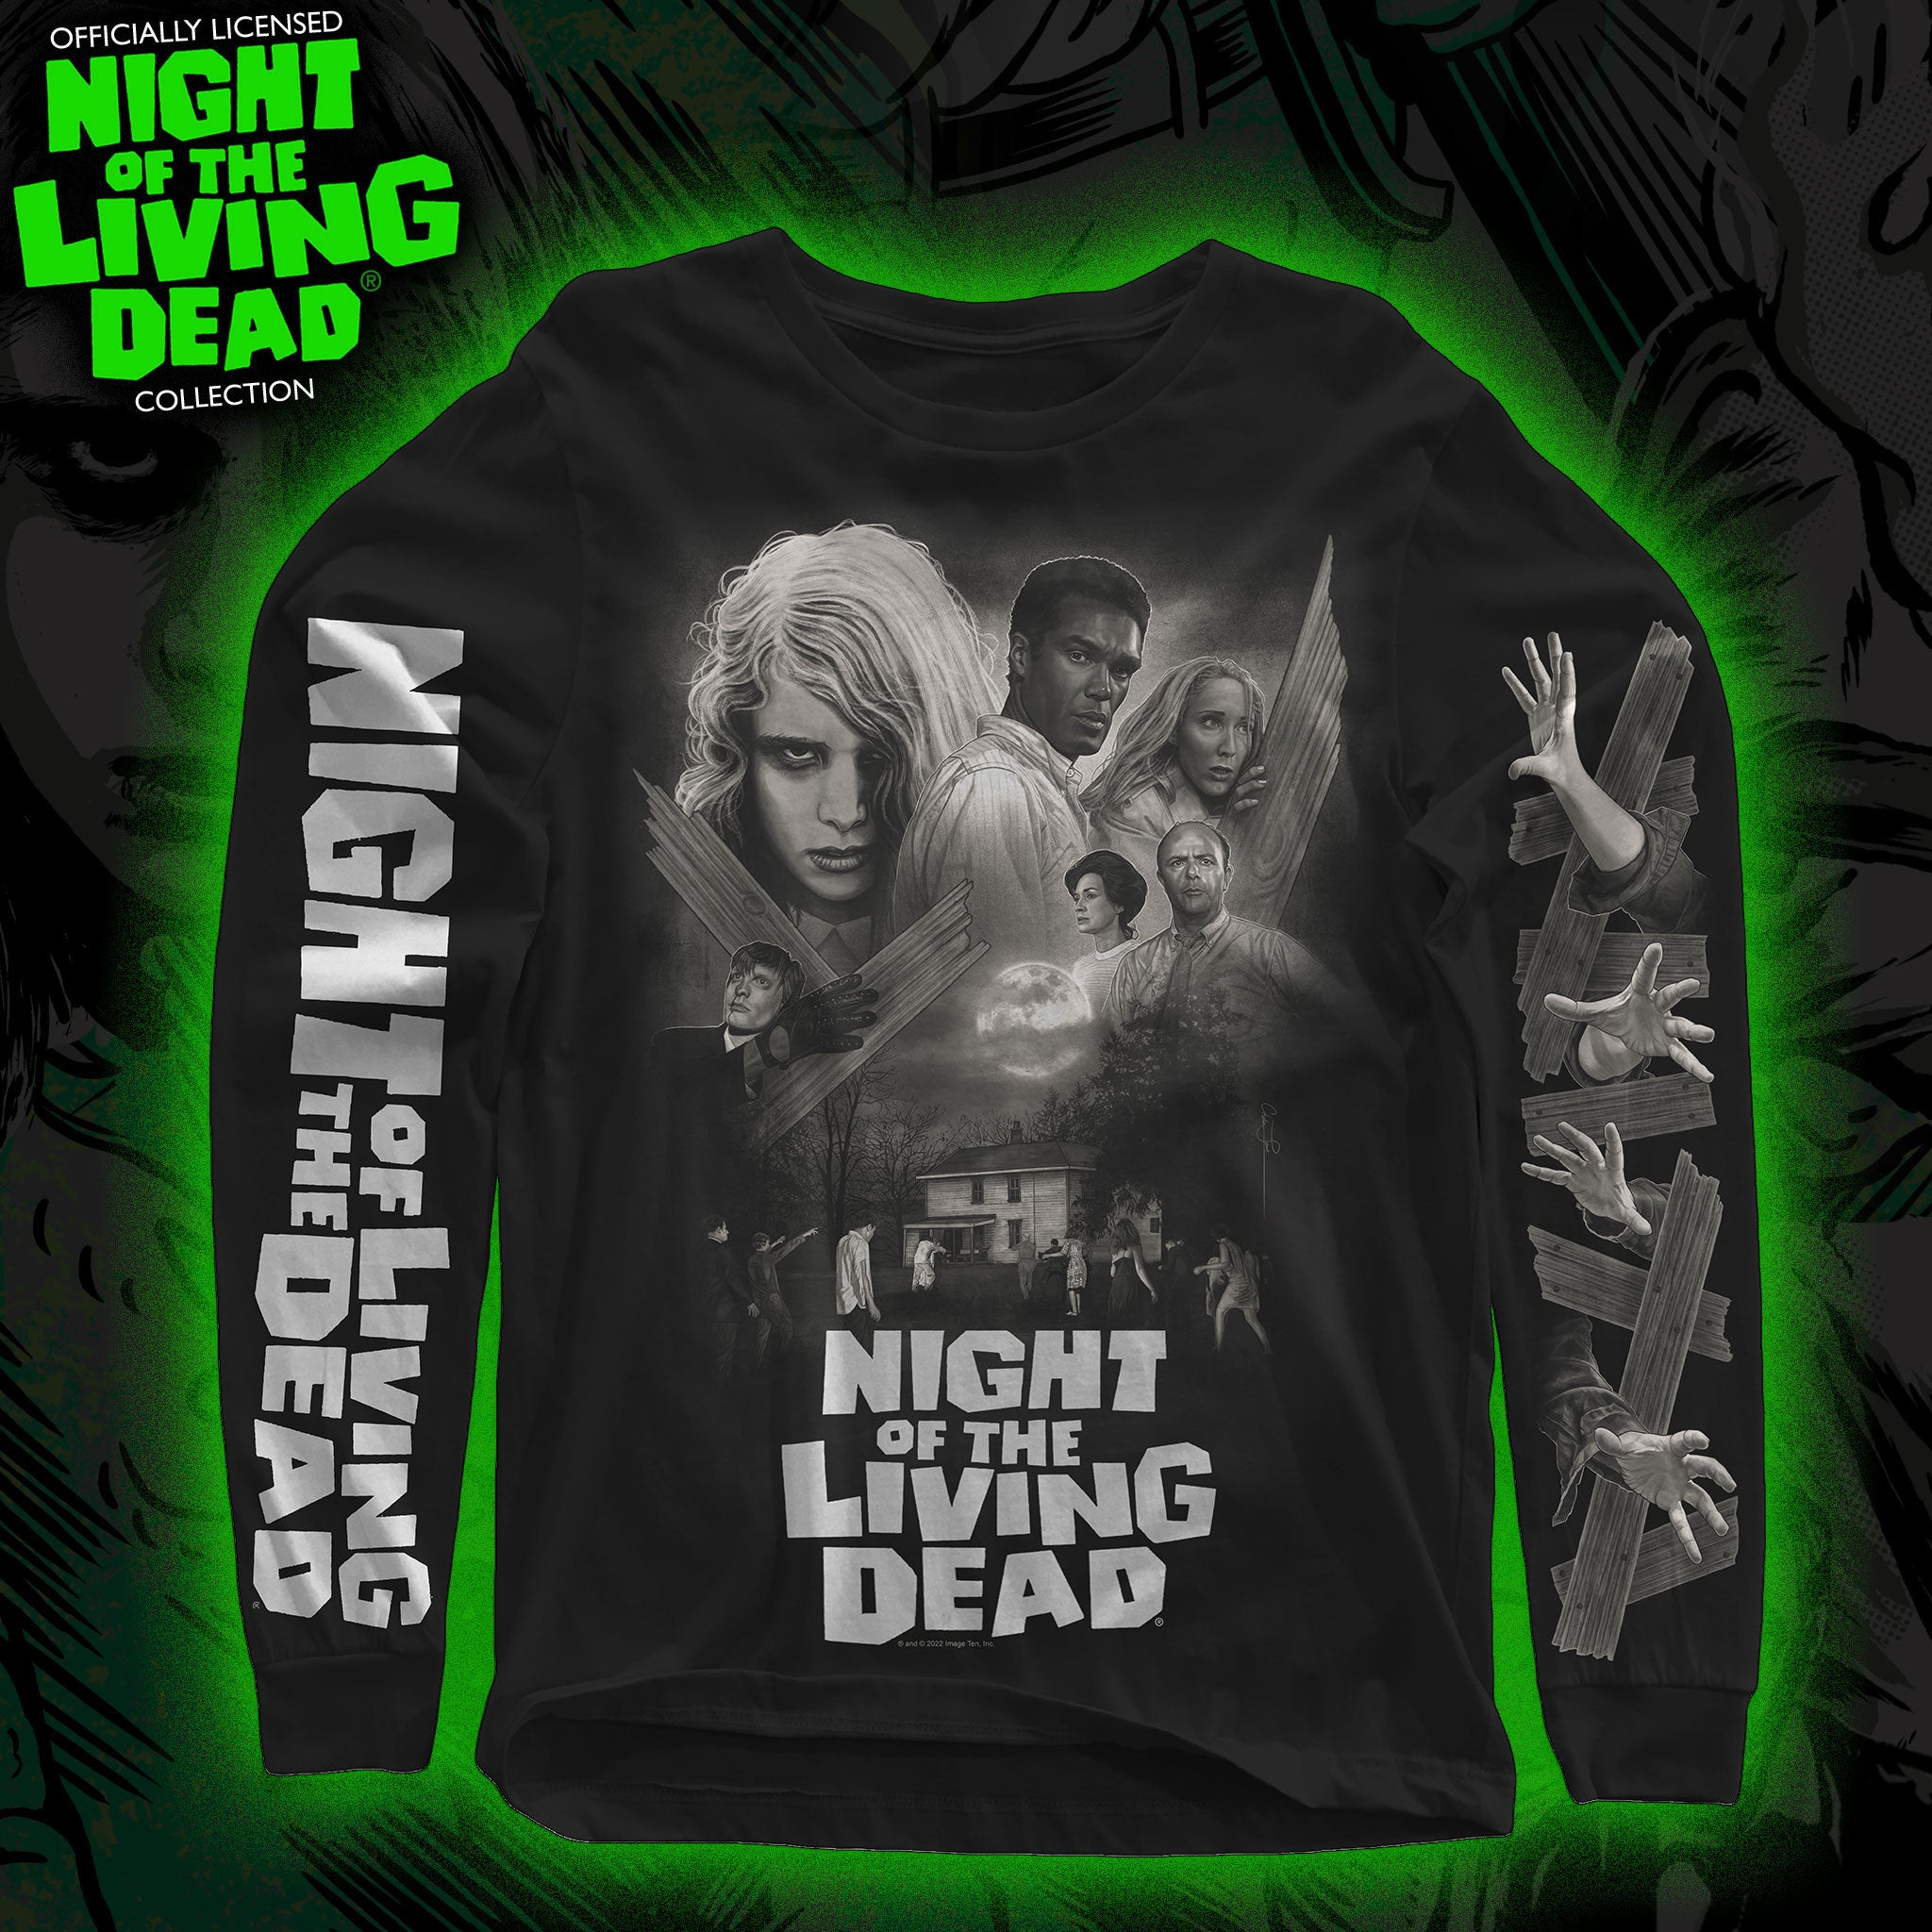 Night of the Living Dead - Long sleeve